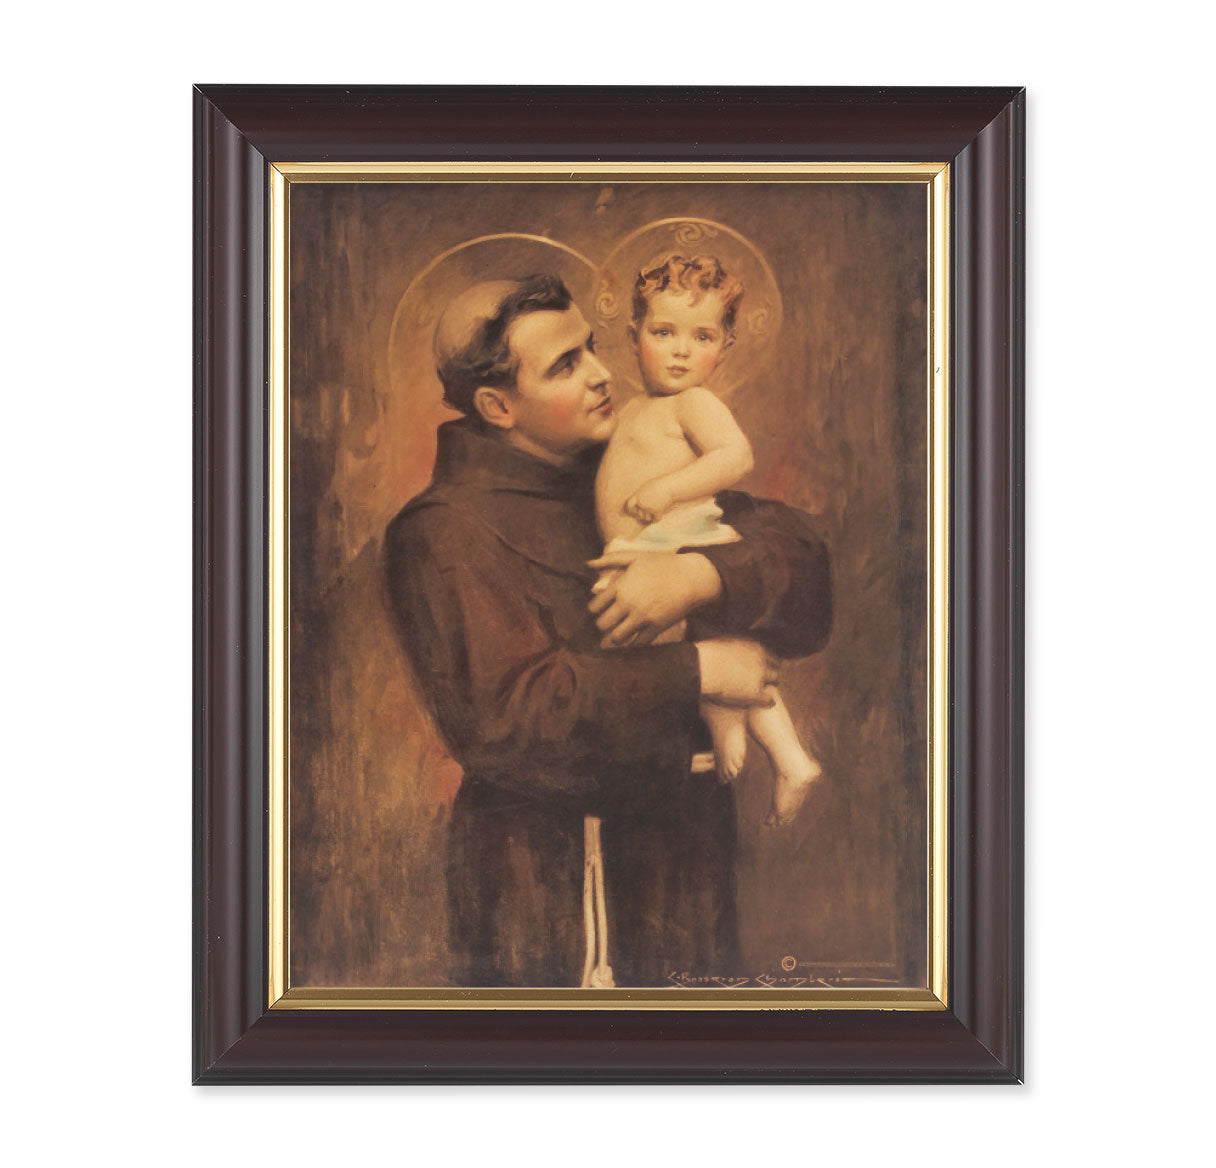 St. Anthony with Jesus Picture Framed Wall Art Decor Medium, Classic Fluted Dark Walnut Finished Frame with Gold-Leaf Lip